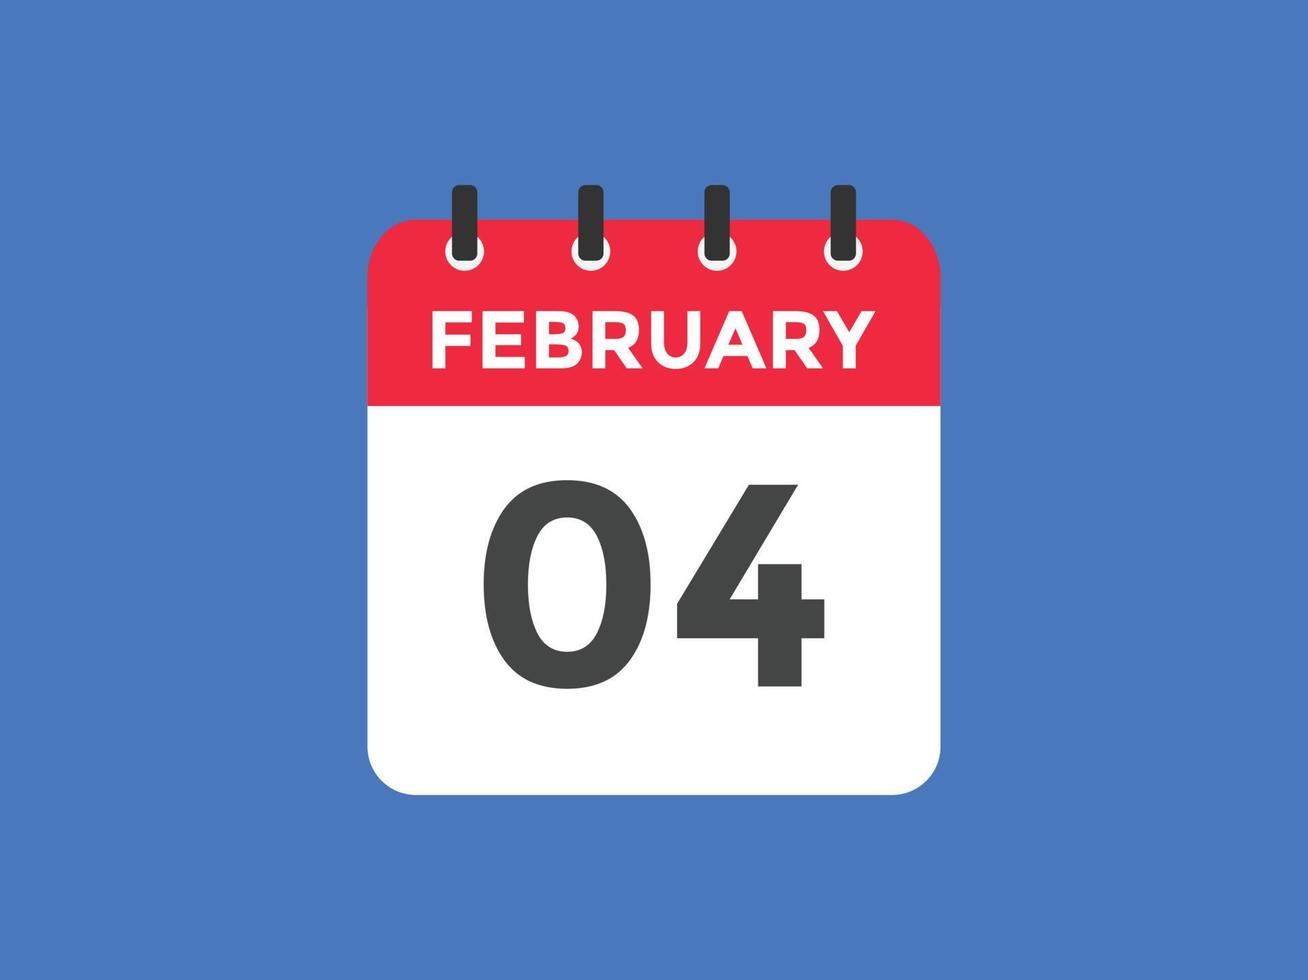 february 4 calendar reminder. 4th february daily calendar icon template. Calendar 4th february icon Design template. Vector illustration